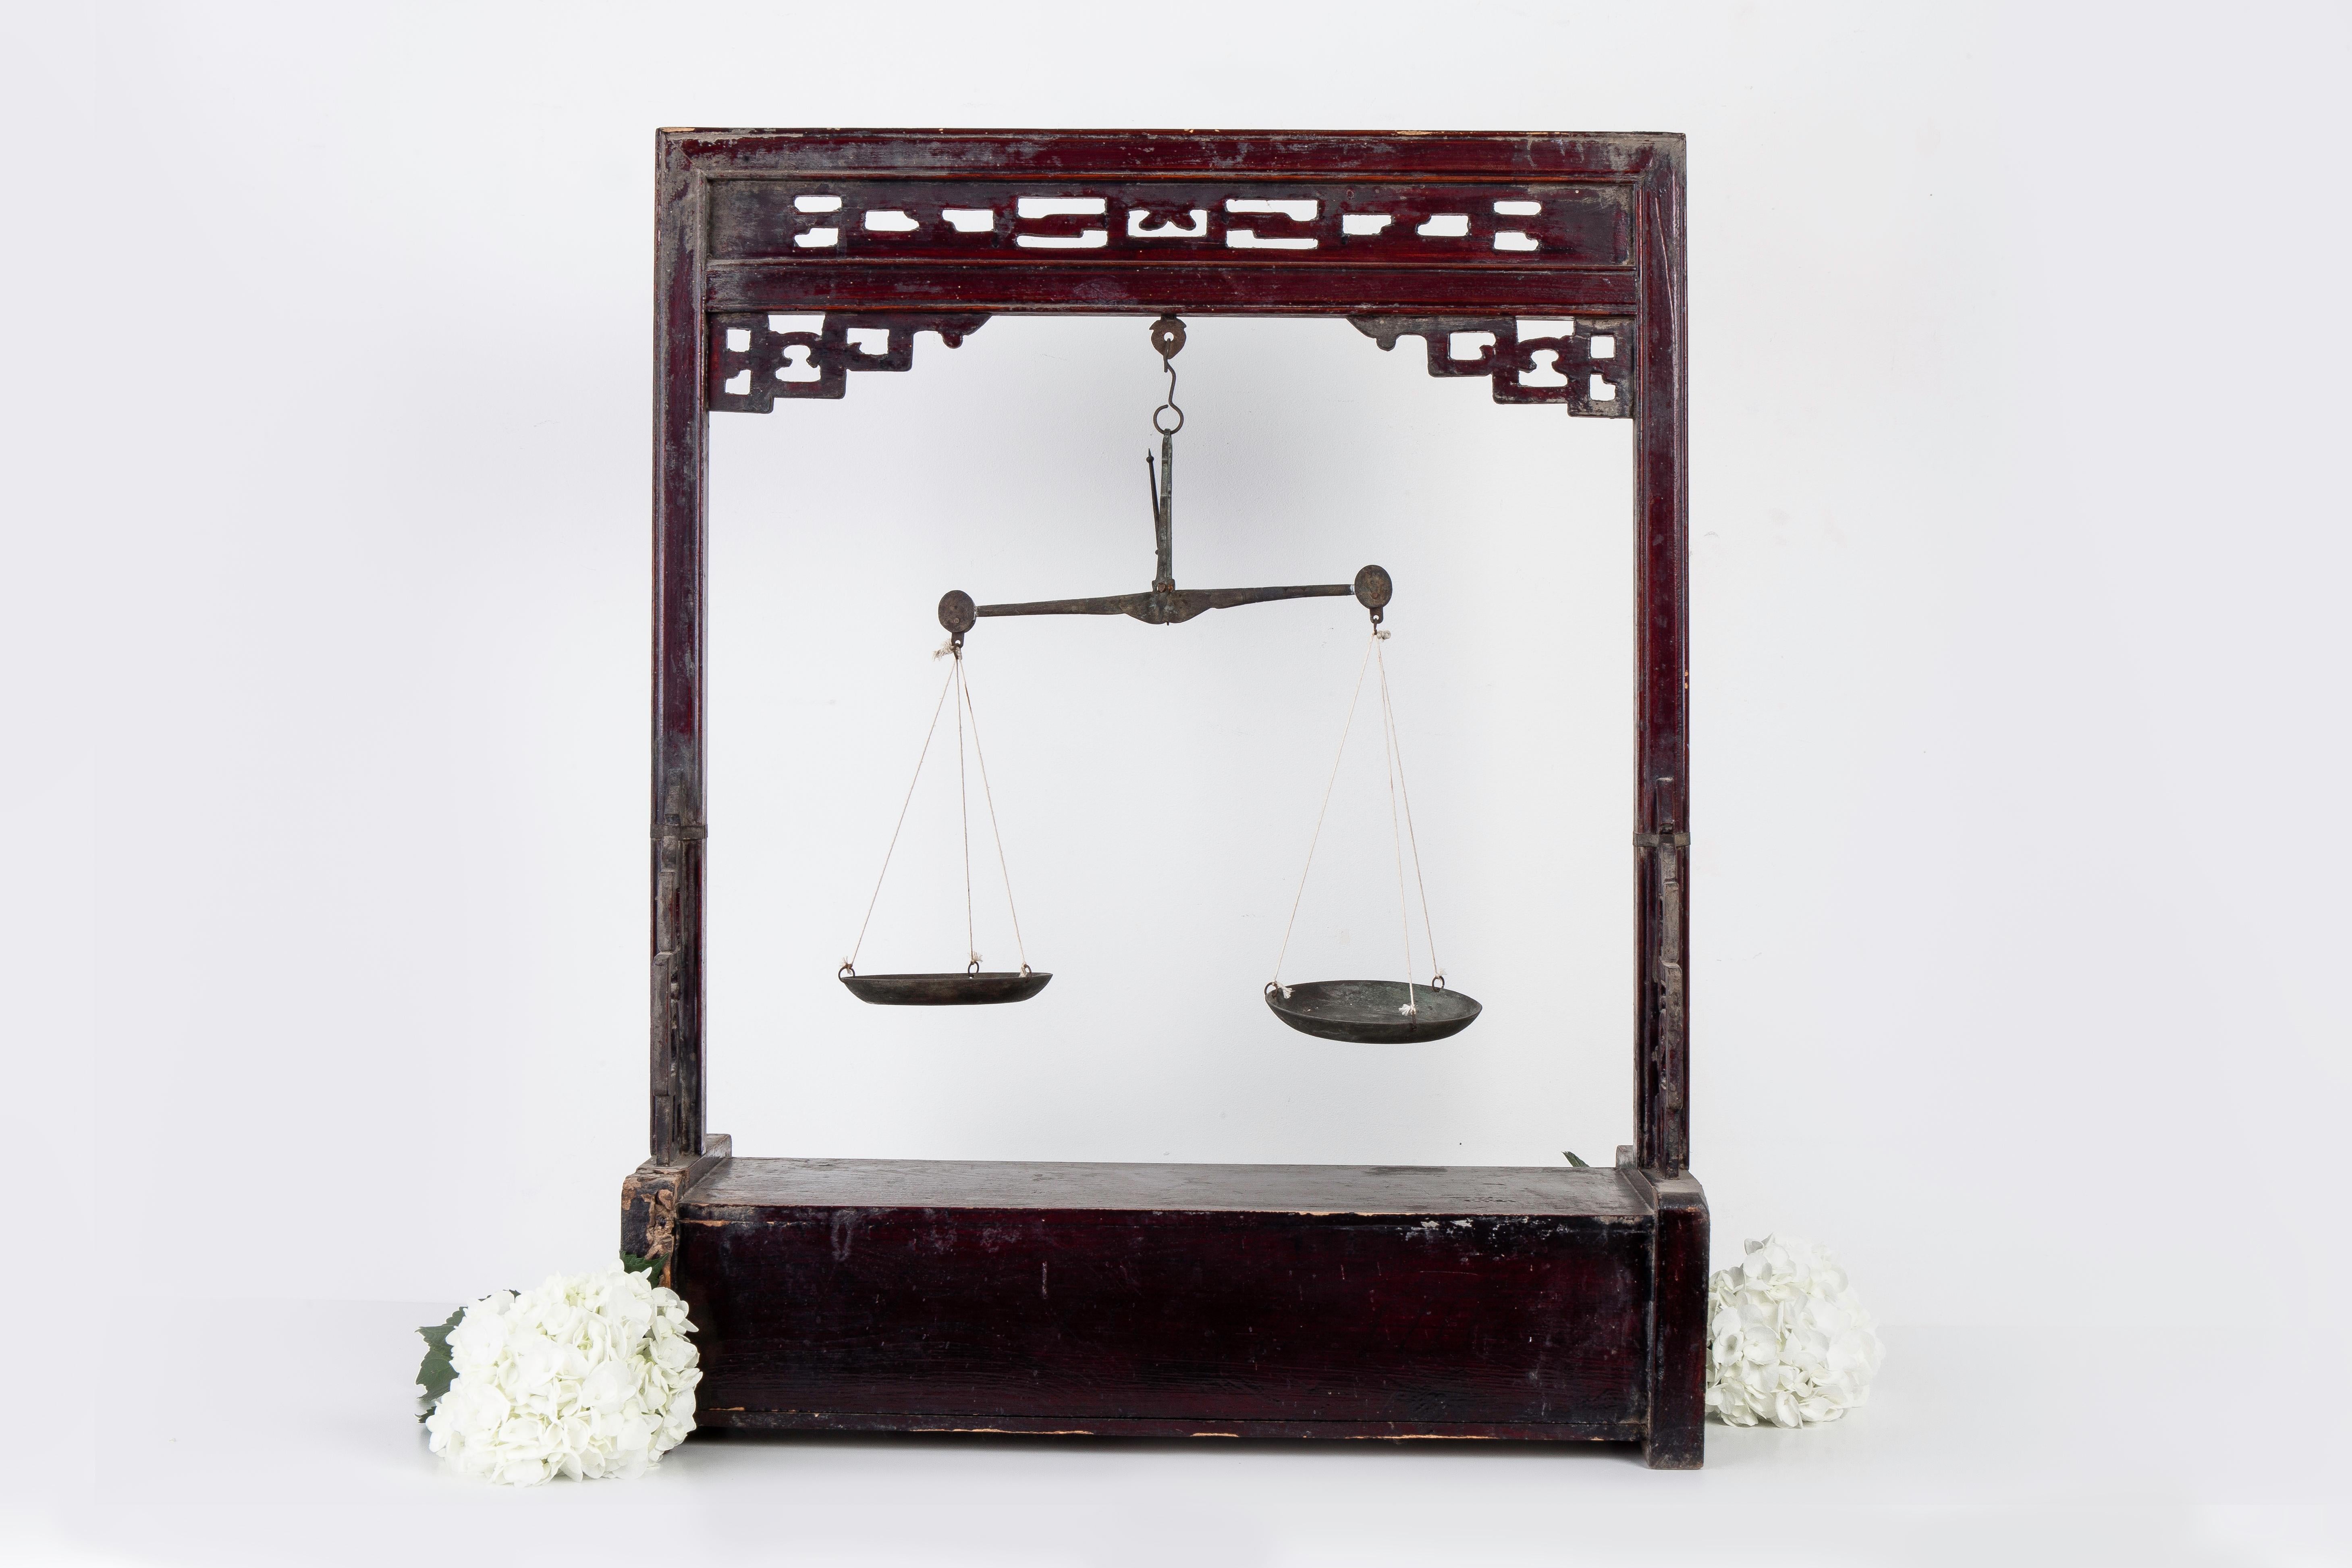 Large Chinese carved wood apothecary balance scale with stand and storage drawer cabinet. It features beautiful carved fretwork on the top and sides featuring brass metal hardware and trim. It is finished in its original dark red lacquer which has